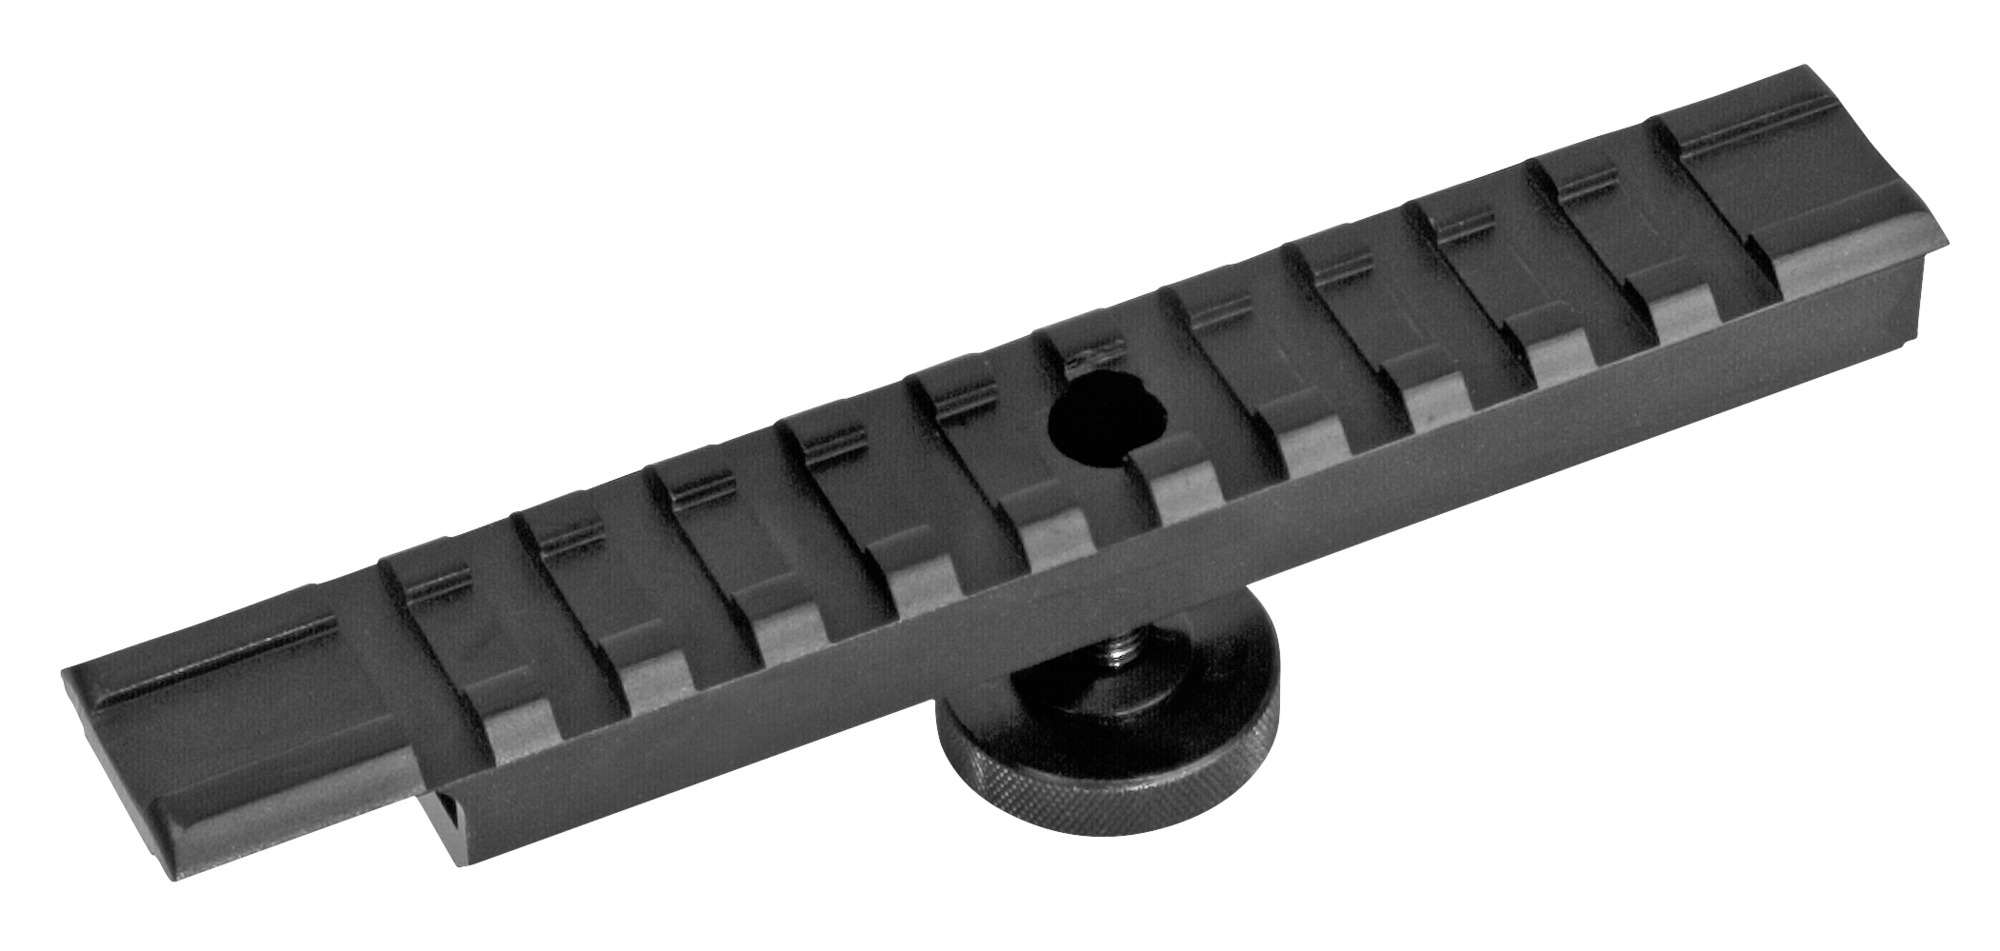 5" Tactical Carry Handle weaver Picatinny Rail Scope Mount 